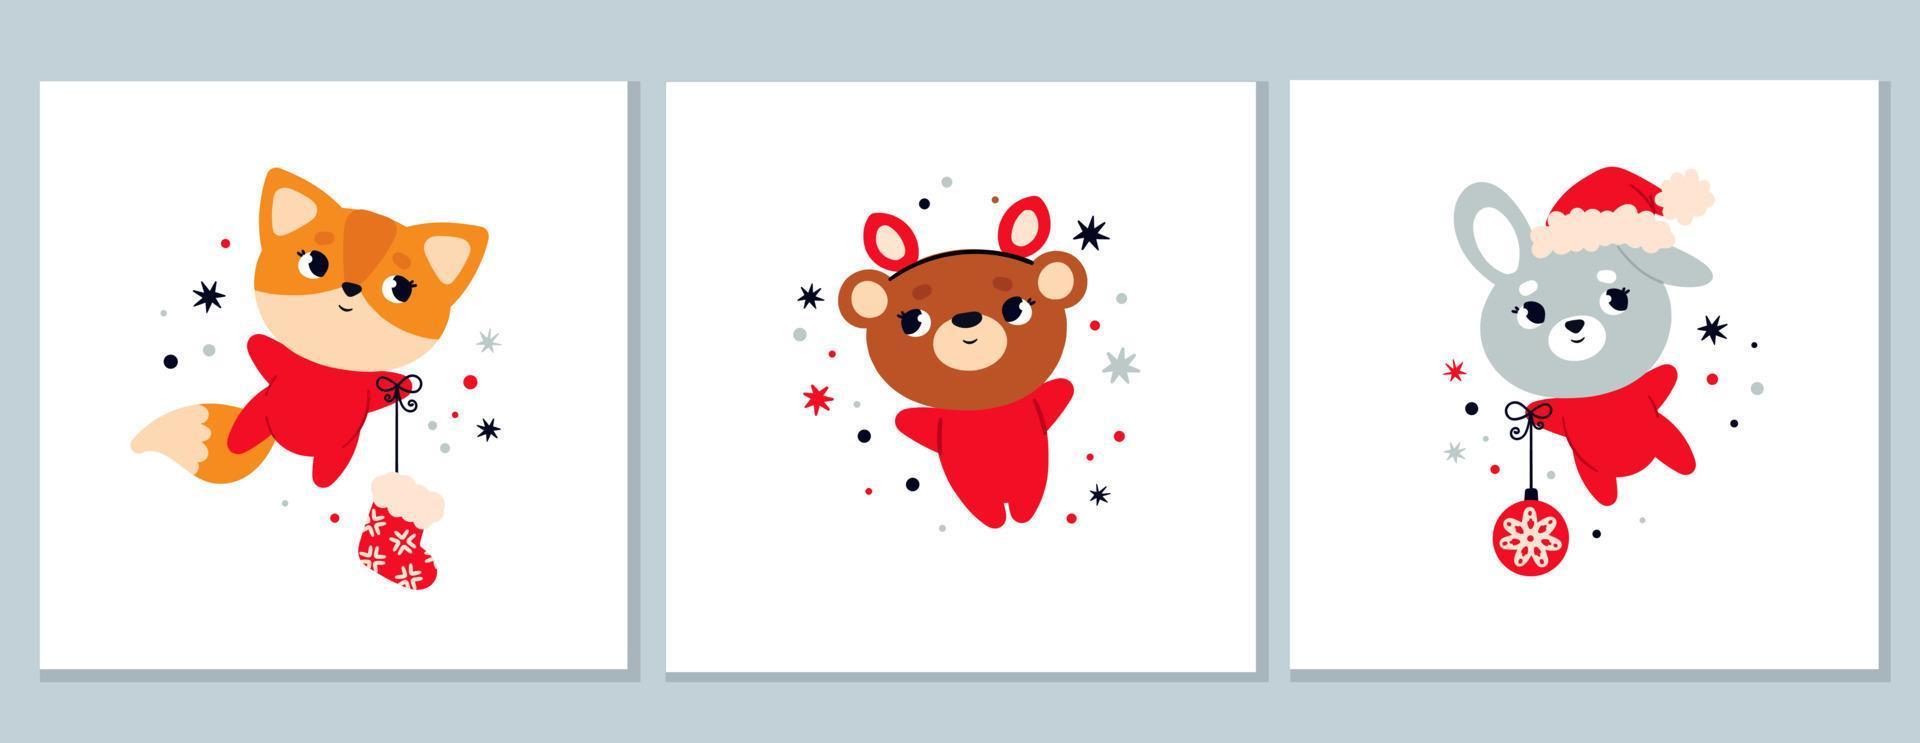 Christmas cards. Animals in New Year's red costumes vector